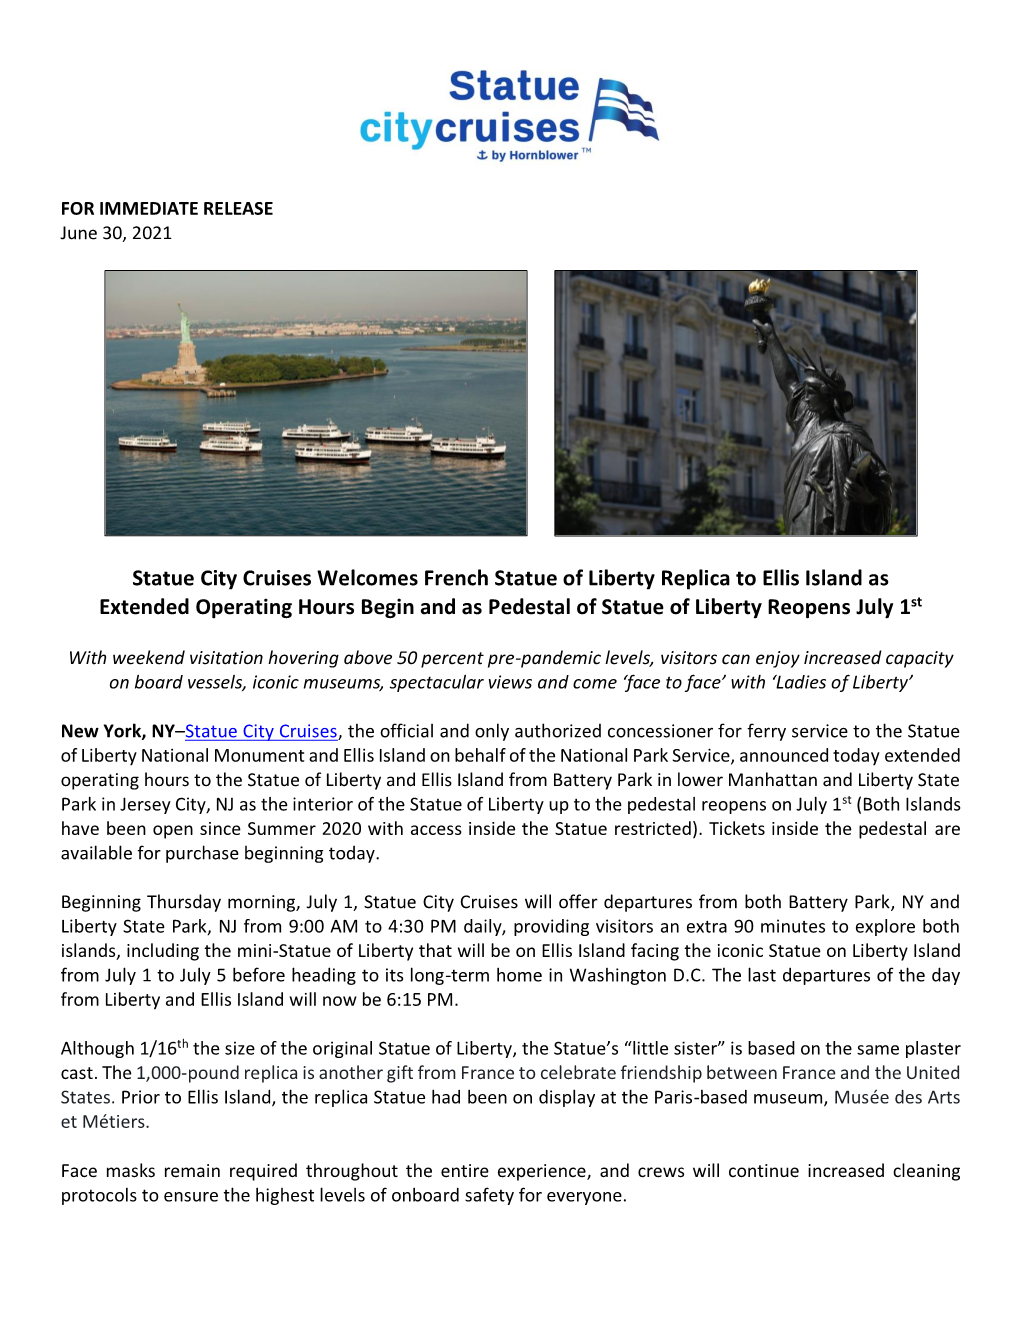 Statue City Cruises Welcomes French Statue of Liberty Replica to Ellis Island As Extended Operating Hours Begin and As Pedestal of Statue of Liberty Reopens July 1St